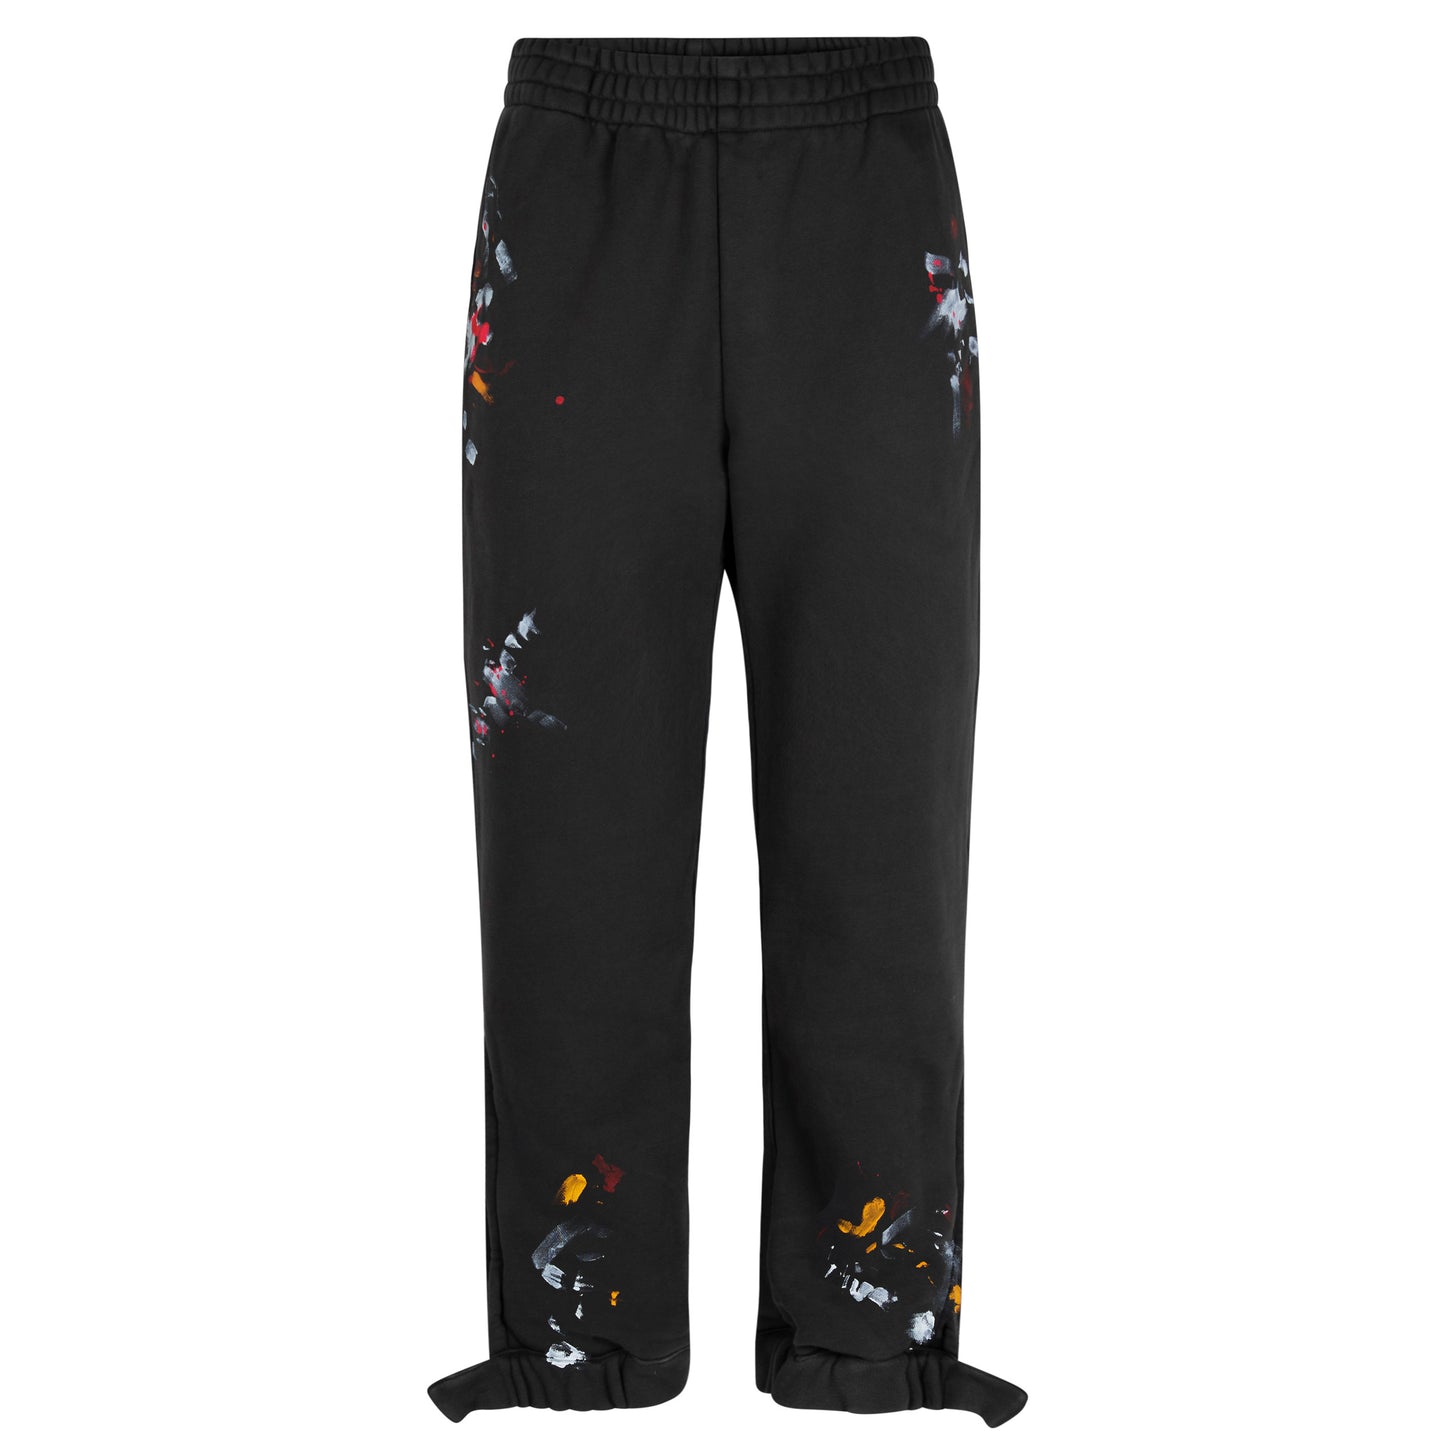 JEEJ THE PERFECT SWEATPANTS - SUNFADED ANTHRACITE